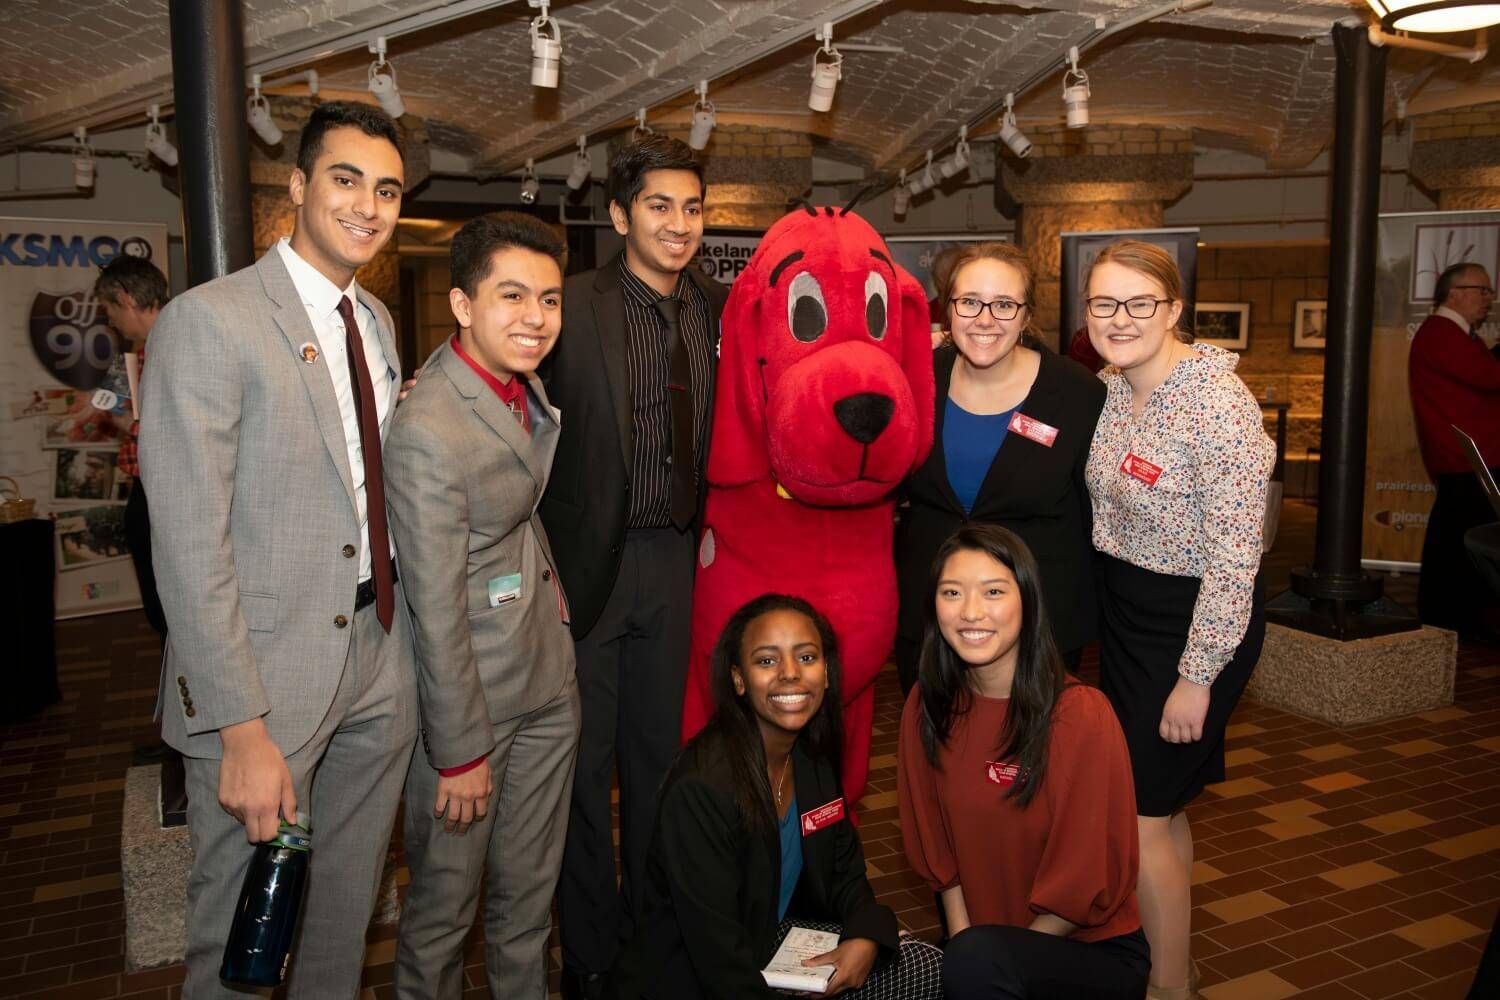 High School Page students who were visiting legislators stopped by the vault for breakfast and hugs from Clifford.